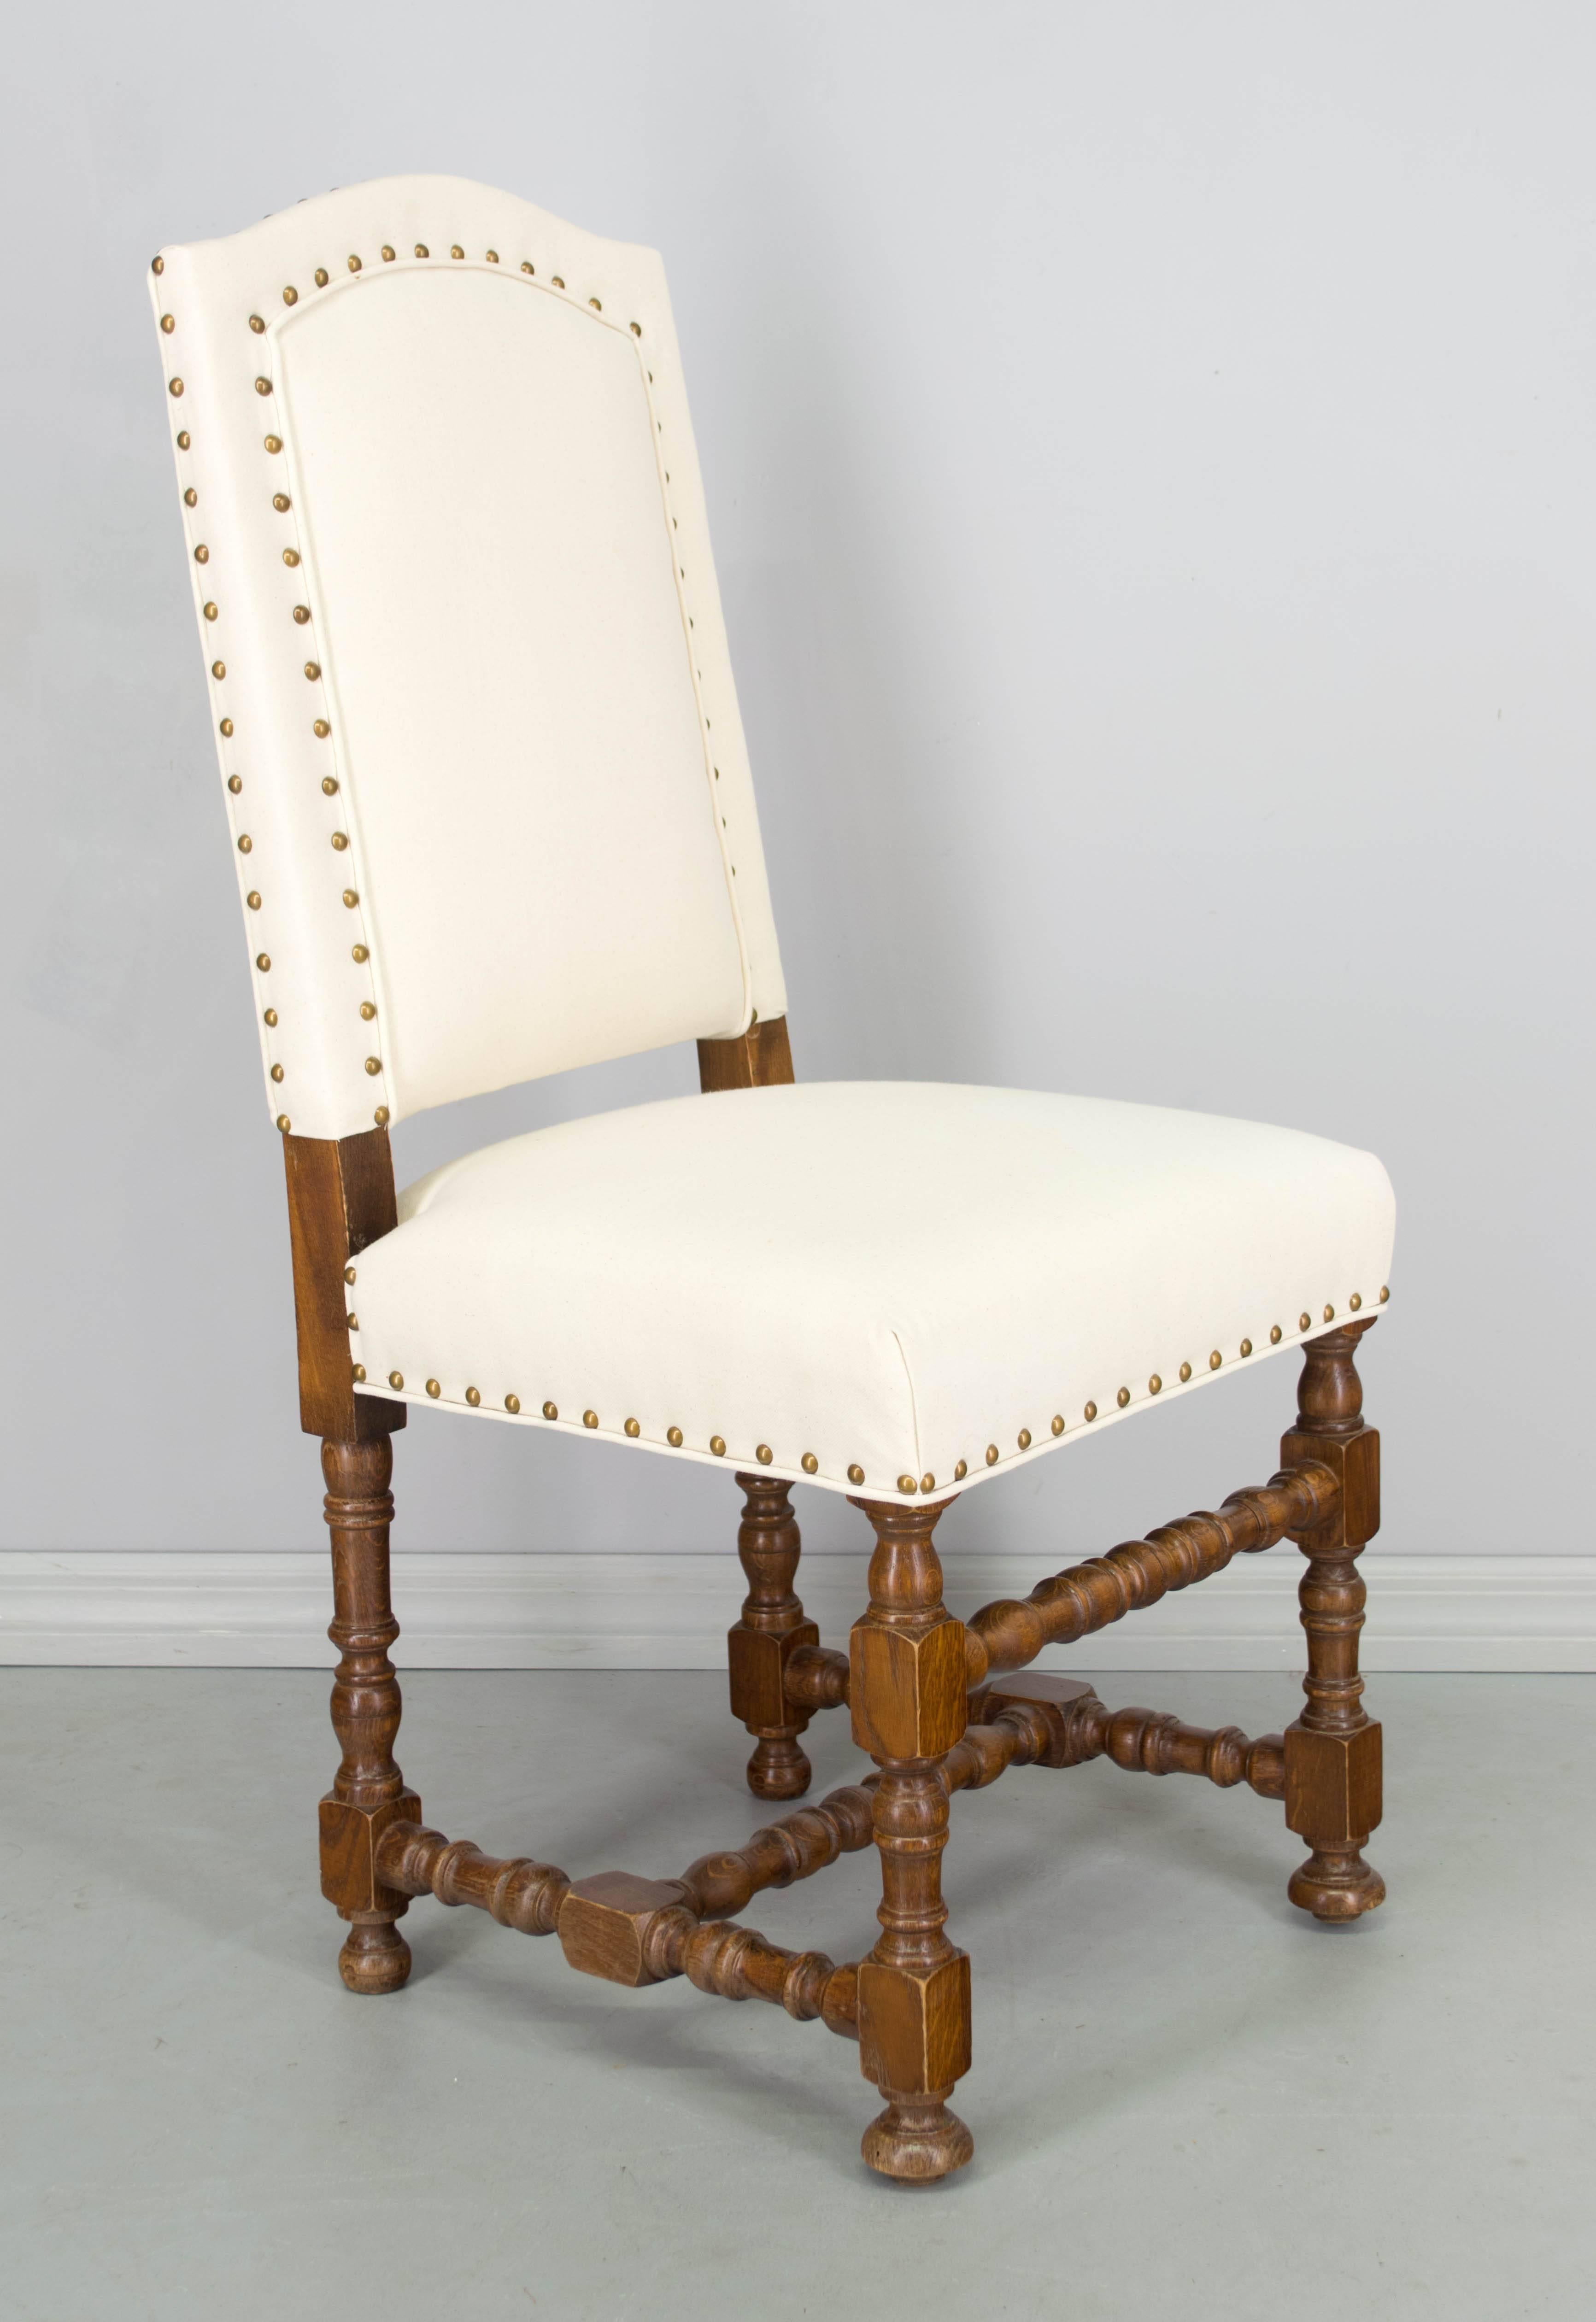 Set of six French Louis XIII style dining chairs made of oak with nicely turned wood legs and stretcher. Newly reupholstered in natural canvas with brass nailhead trim. Sturdy and comfortable seating. We have a large selection of French antiques.